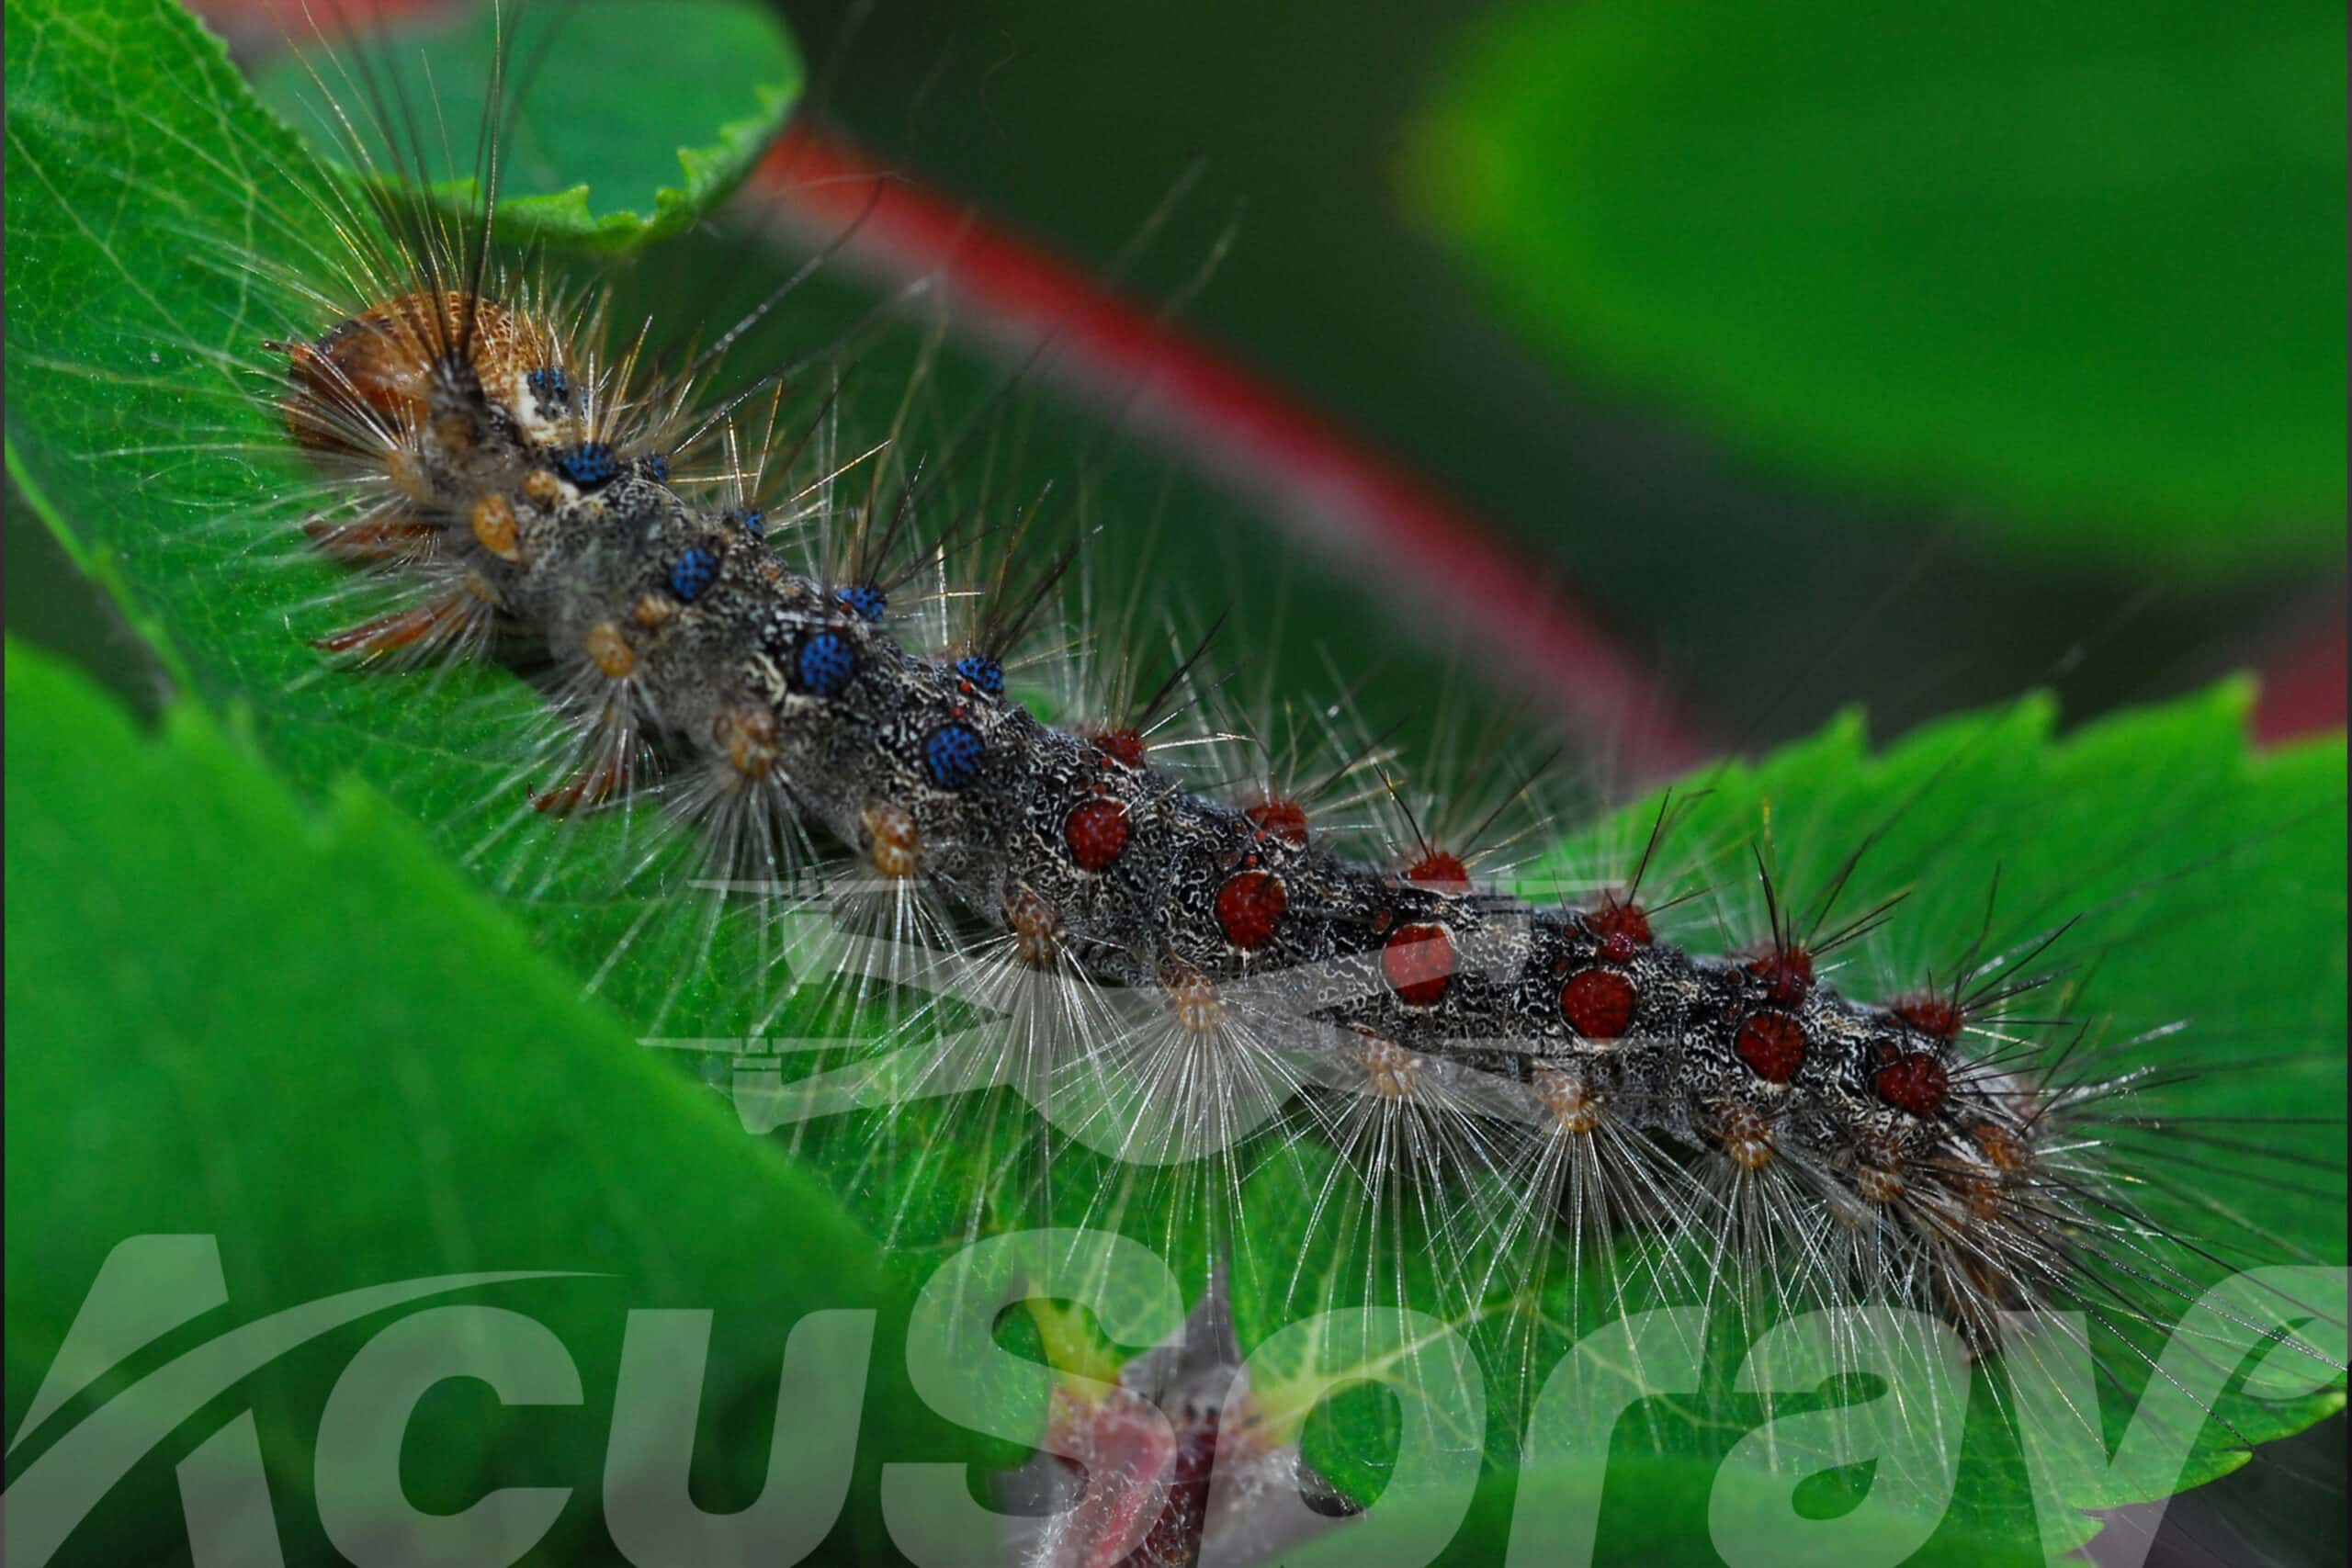 A Gypsy Moth Caterpillar on a leaf, illustrating the need for precision drone spray pest control.